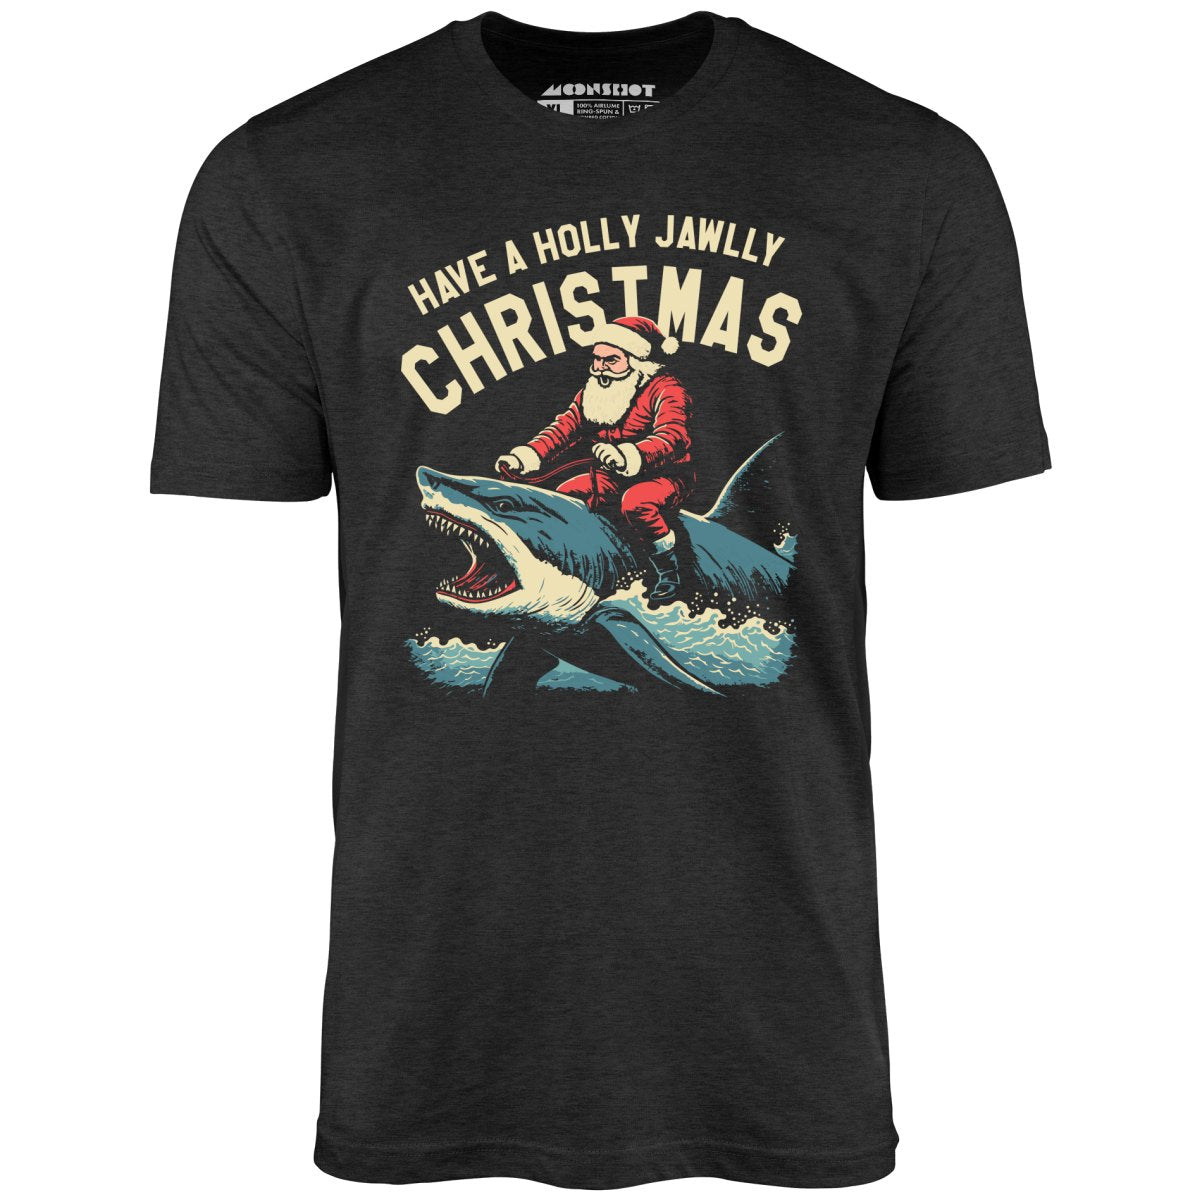 Have a Holly Jawlly Christmas - Unisex T-Shirt